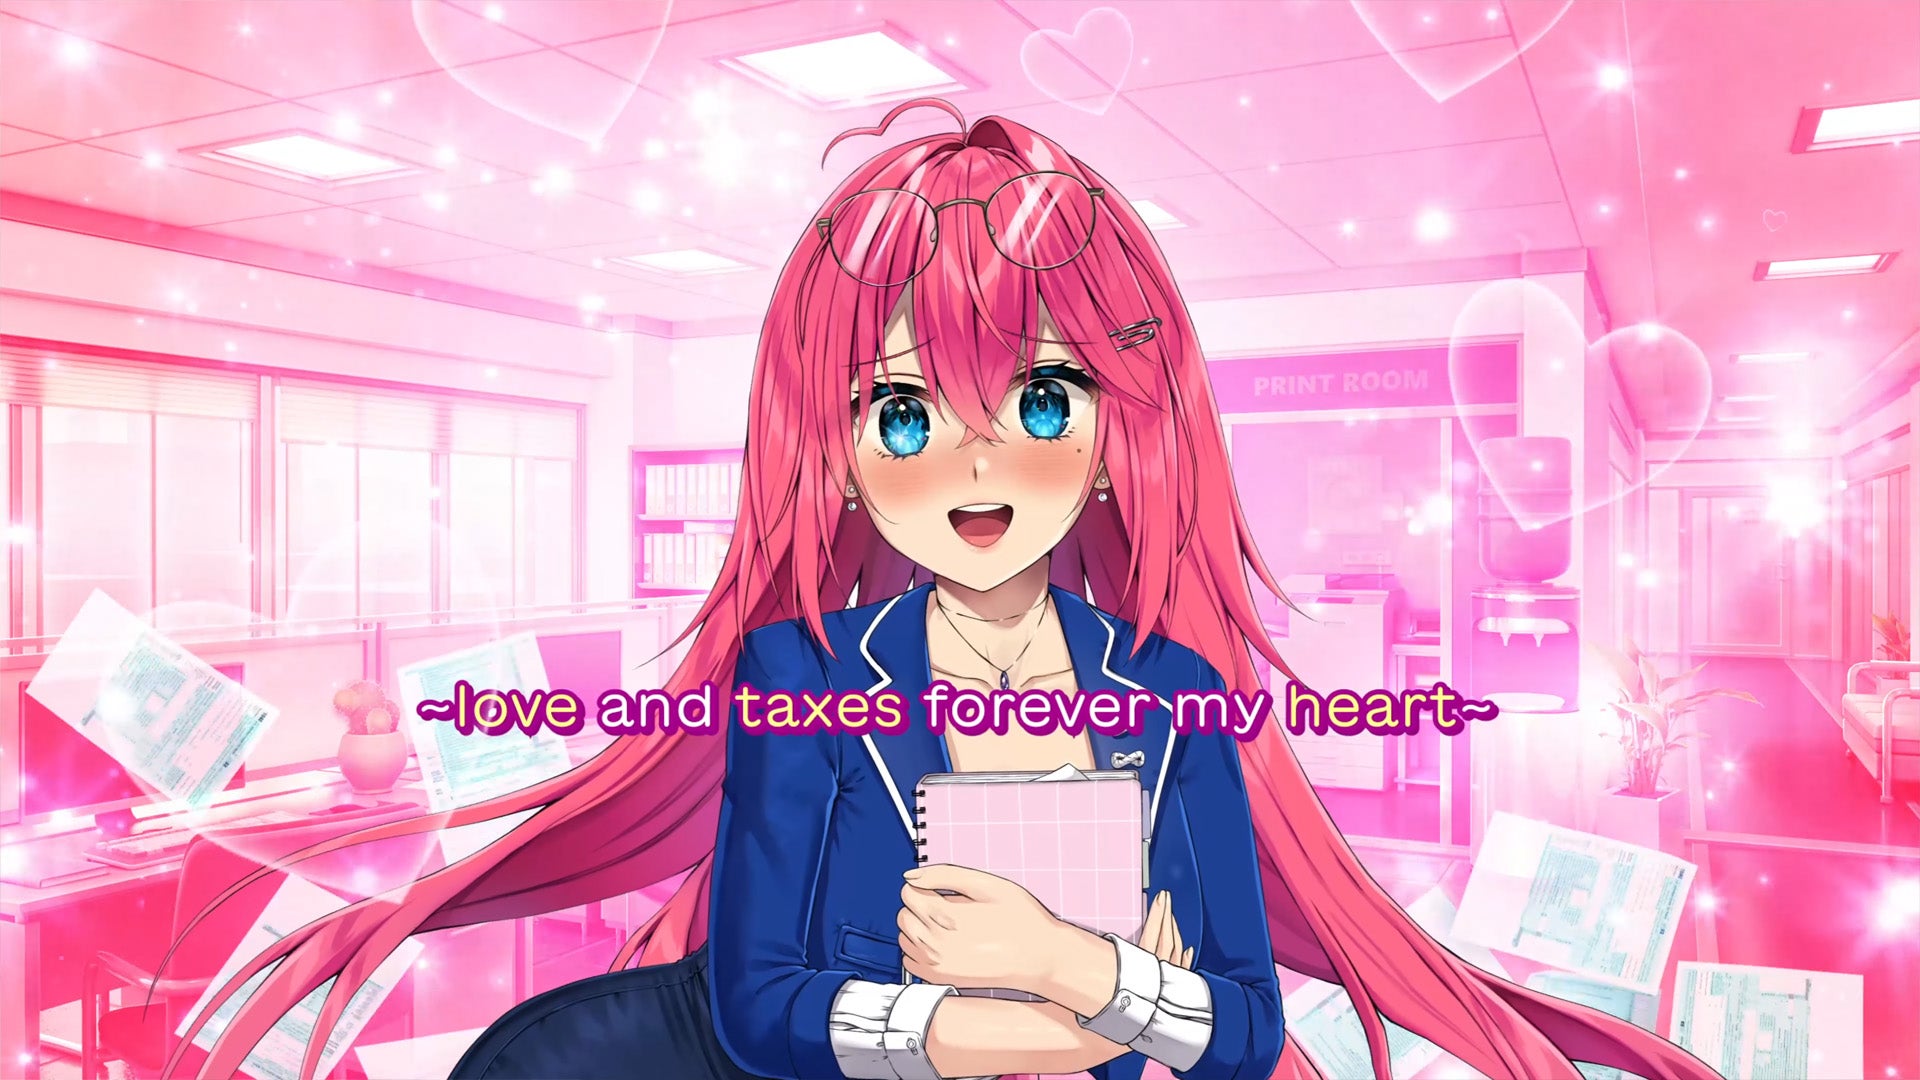 Dating sim that helps you file your taxes delisted from Steam for obvious reasons